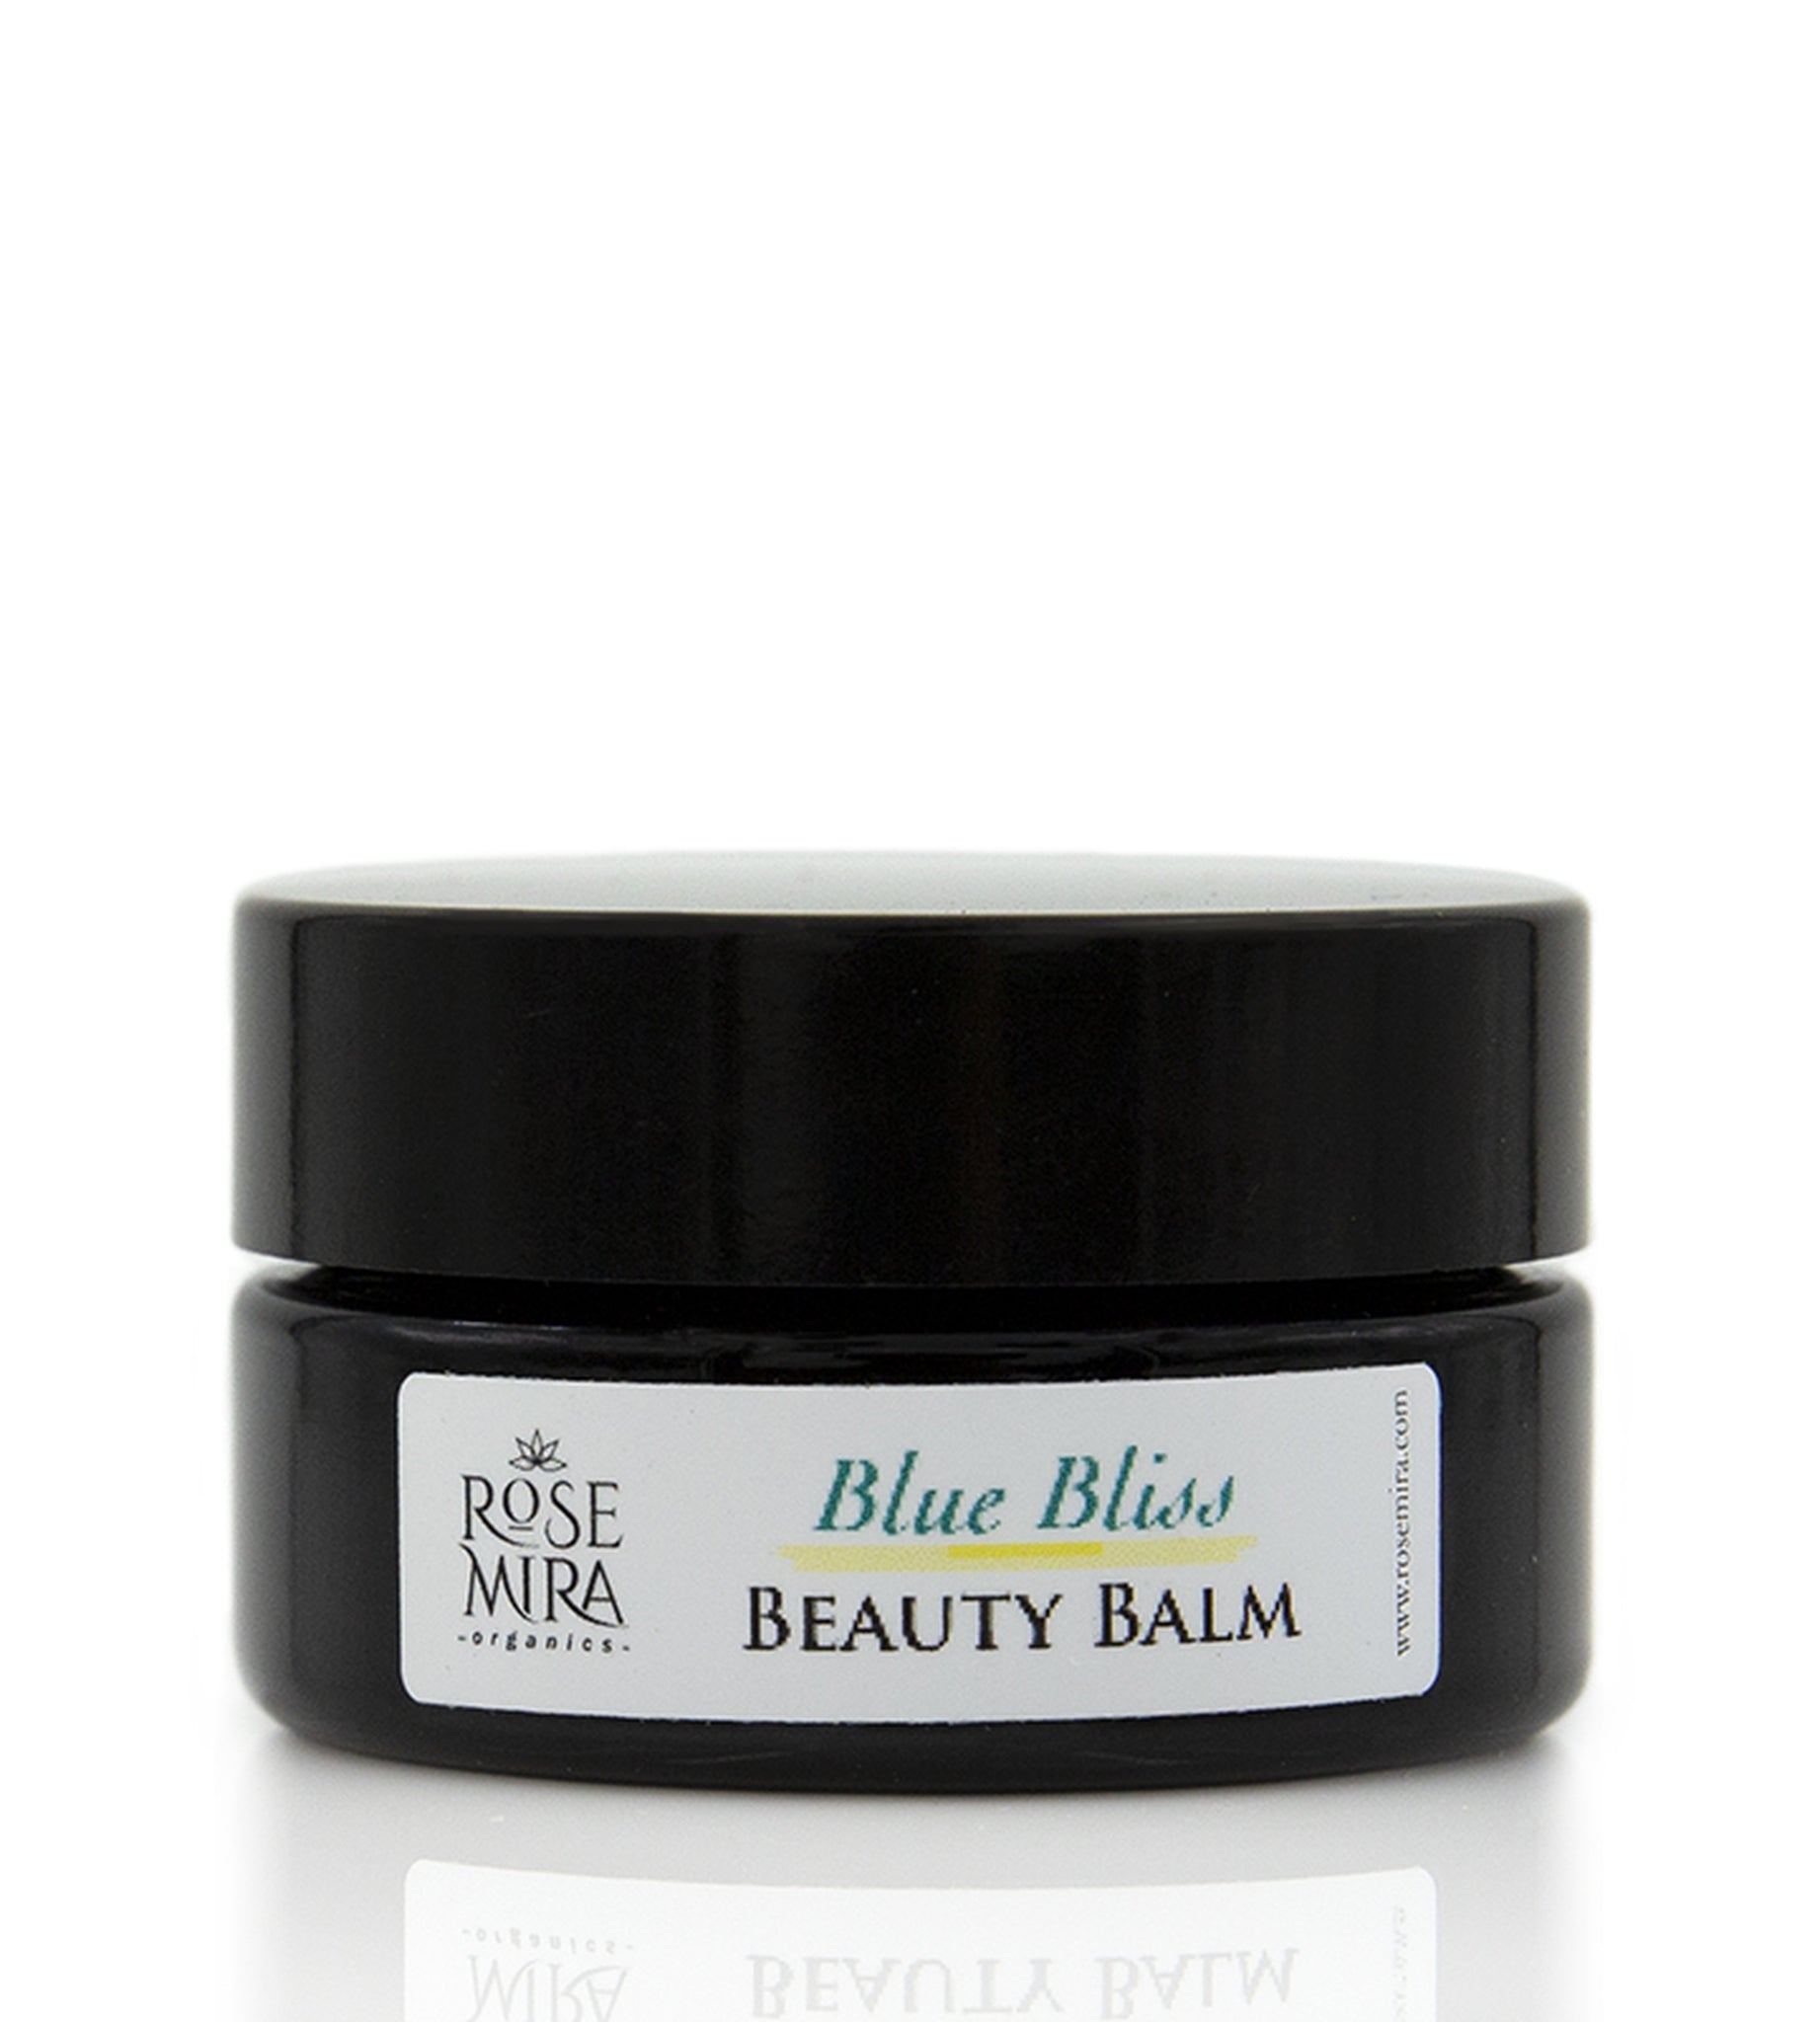 Blue Bliss Beauty Balm (Day/Night) - Guy Christopher